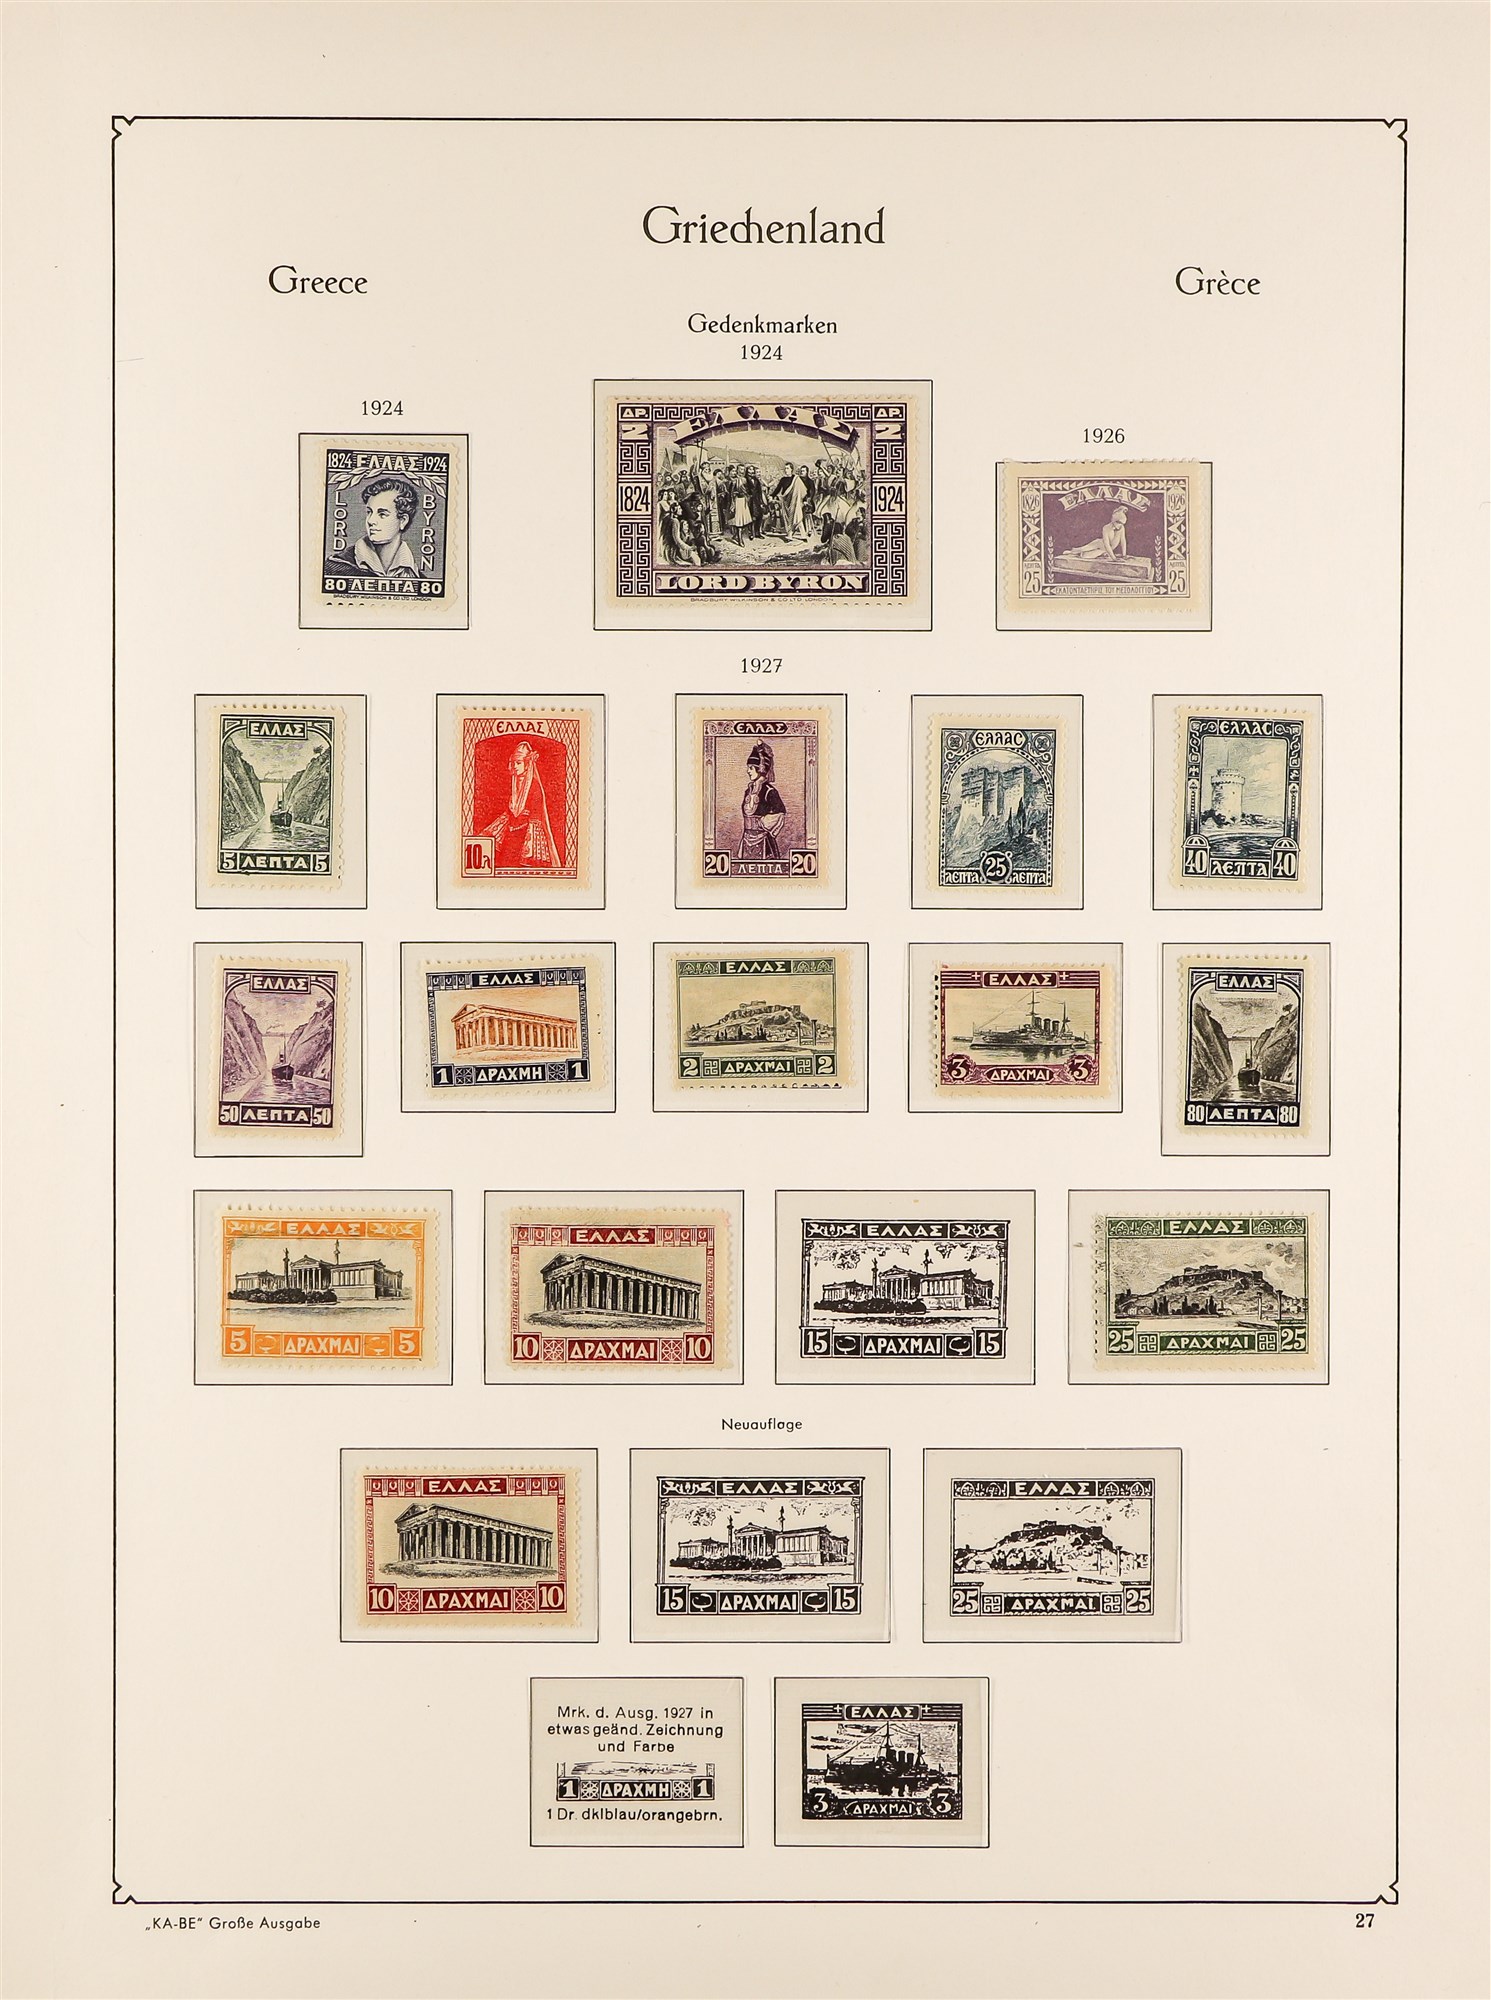 GREECE 1901 - 1930 MINT COLLECTION of 200+ stamps on Ka-Be hingeless album pages, comprehensive incl - Image 12 of 14